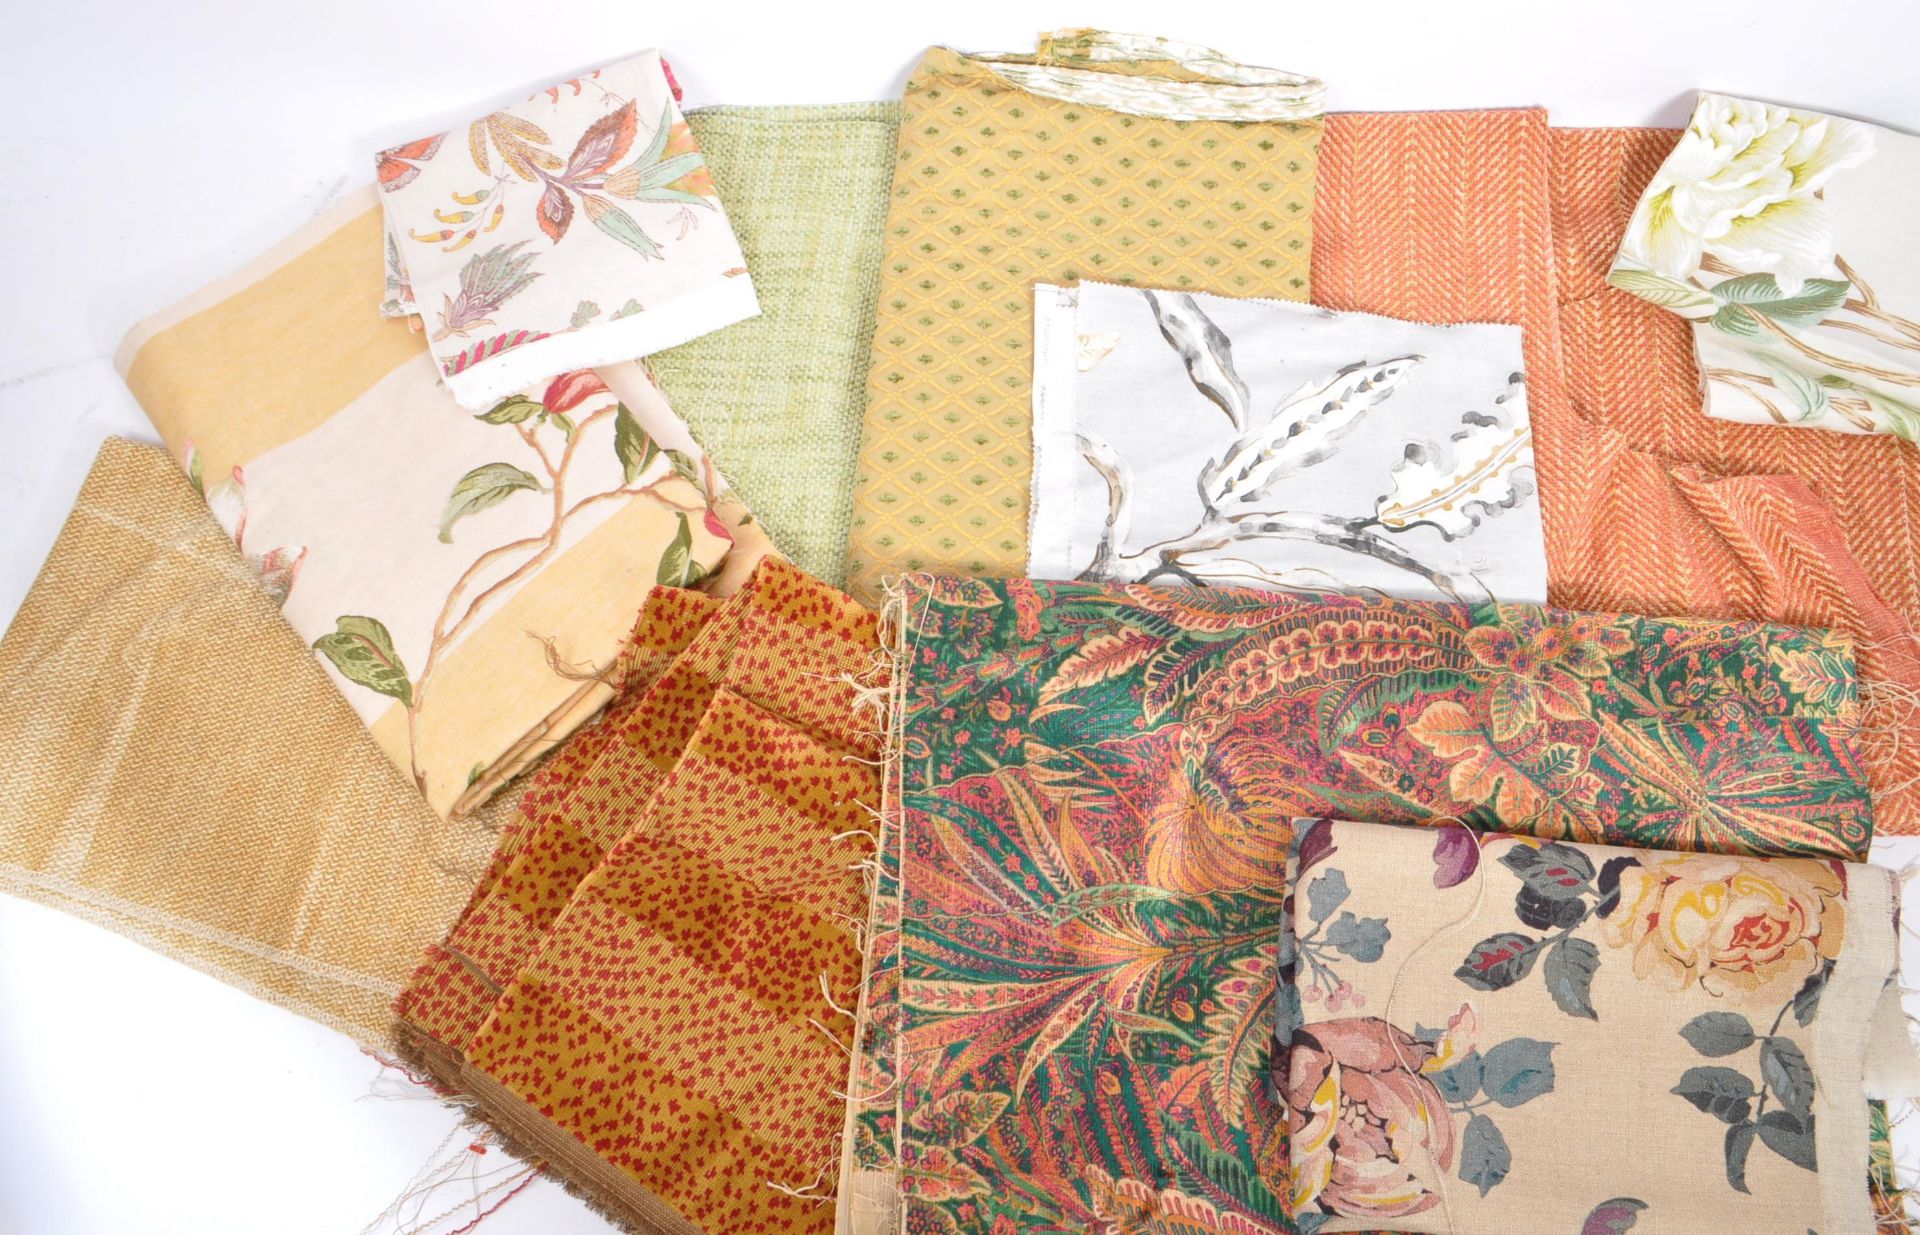 COLLECTION OF VINTAGE LIBERTY MORRIS STYLE FABRIC CLOTH TEXTILES